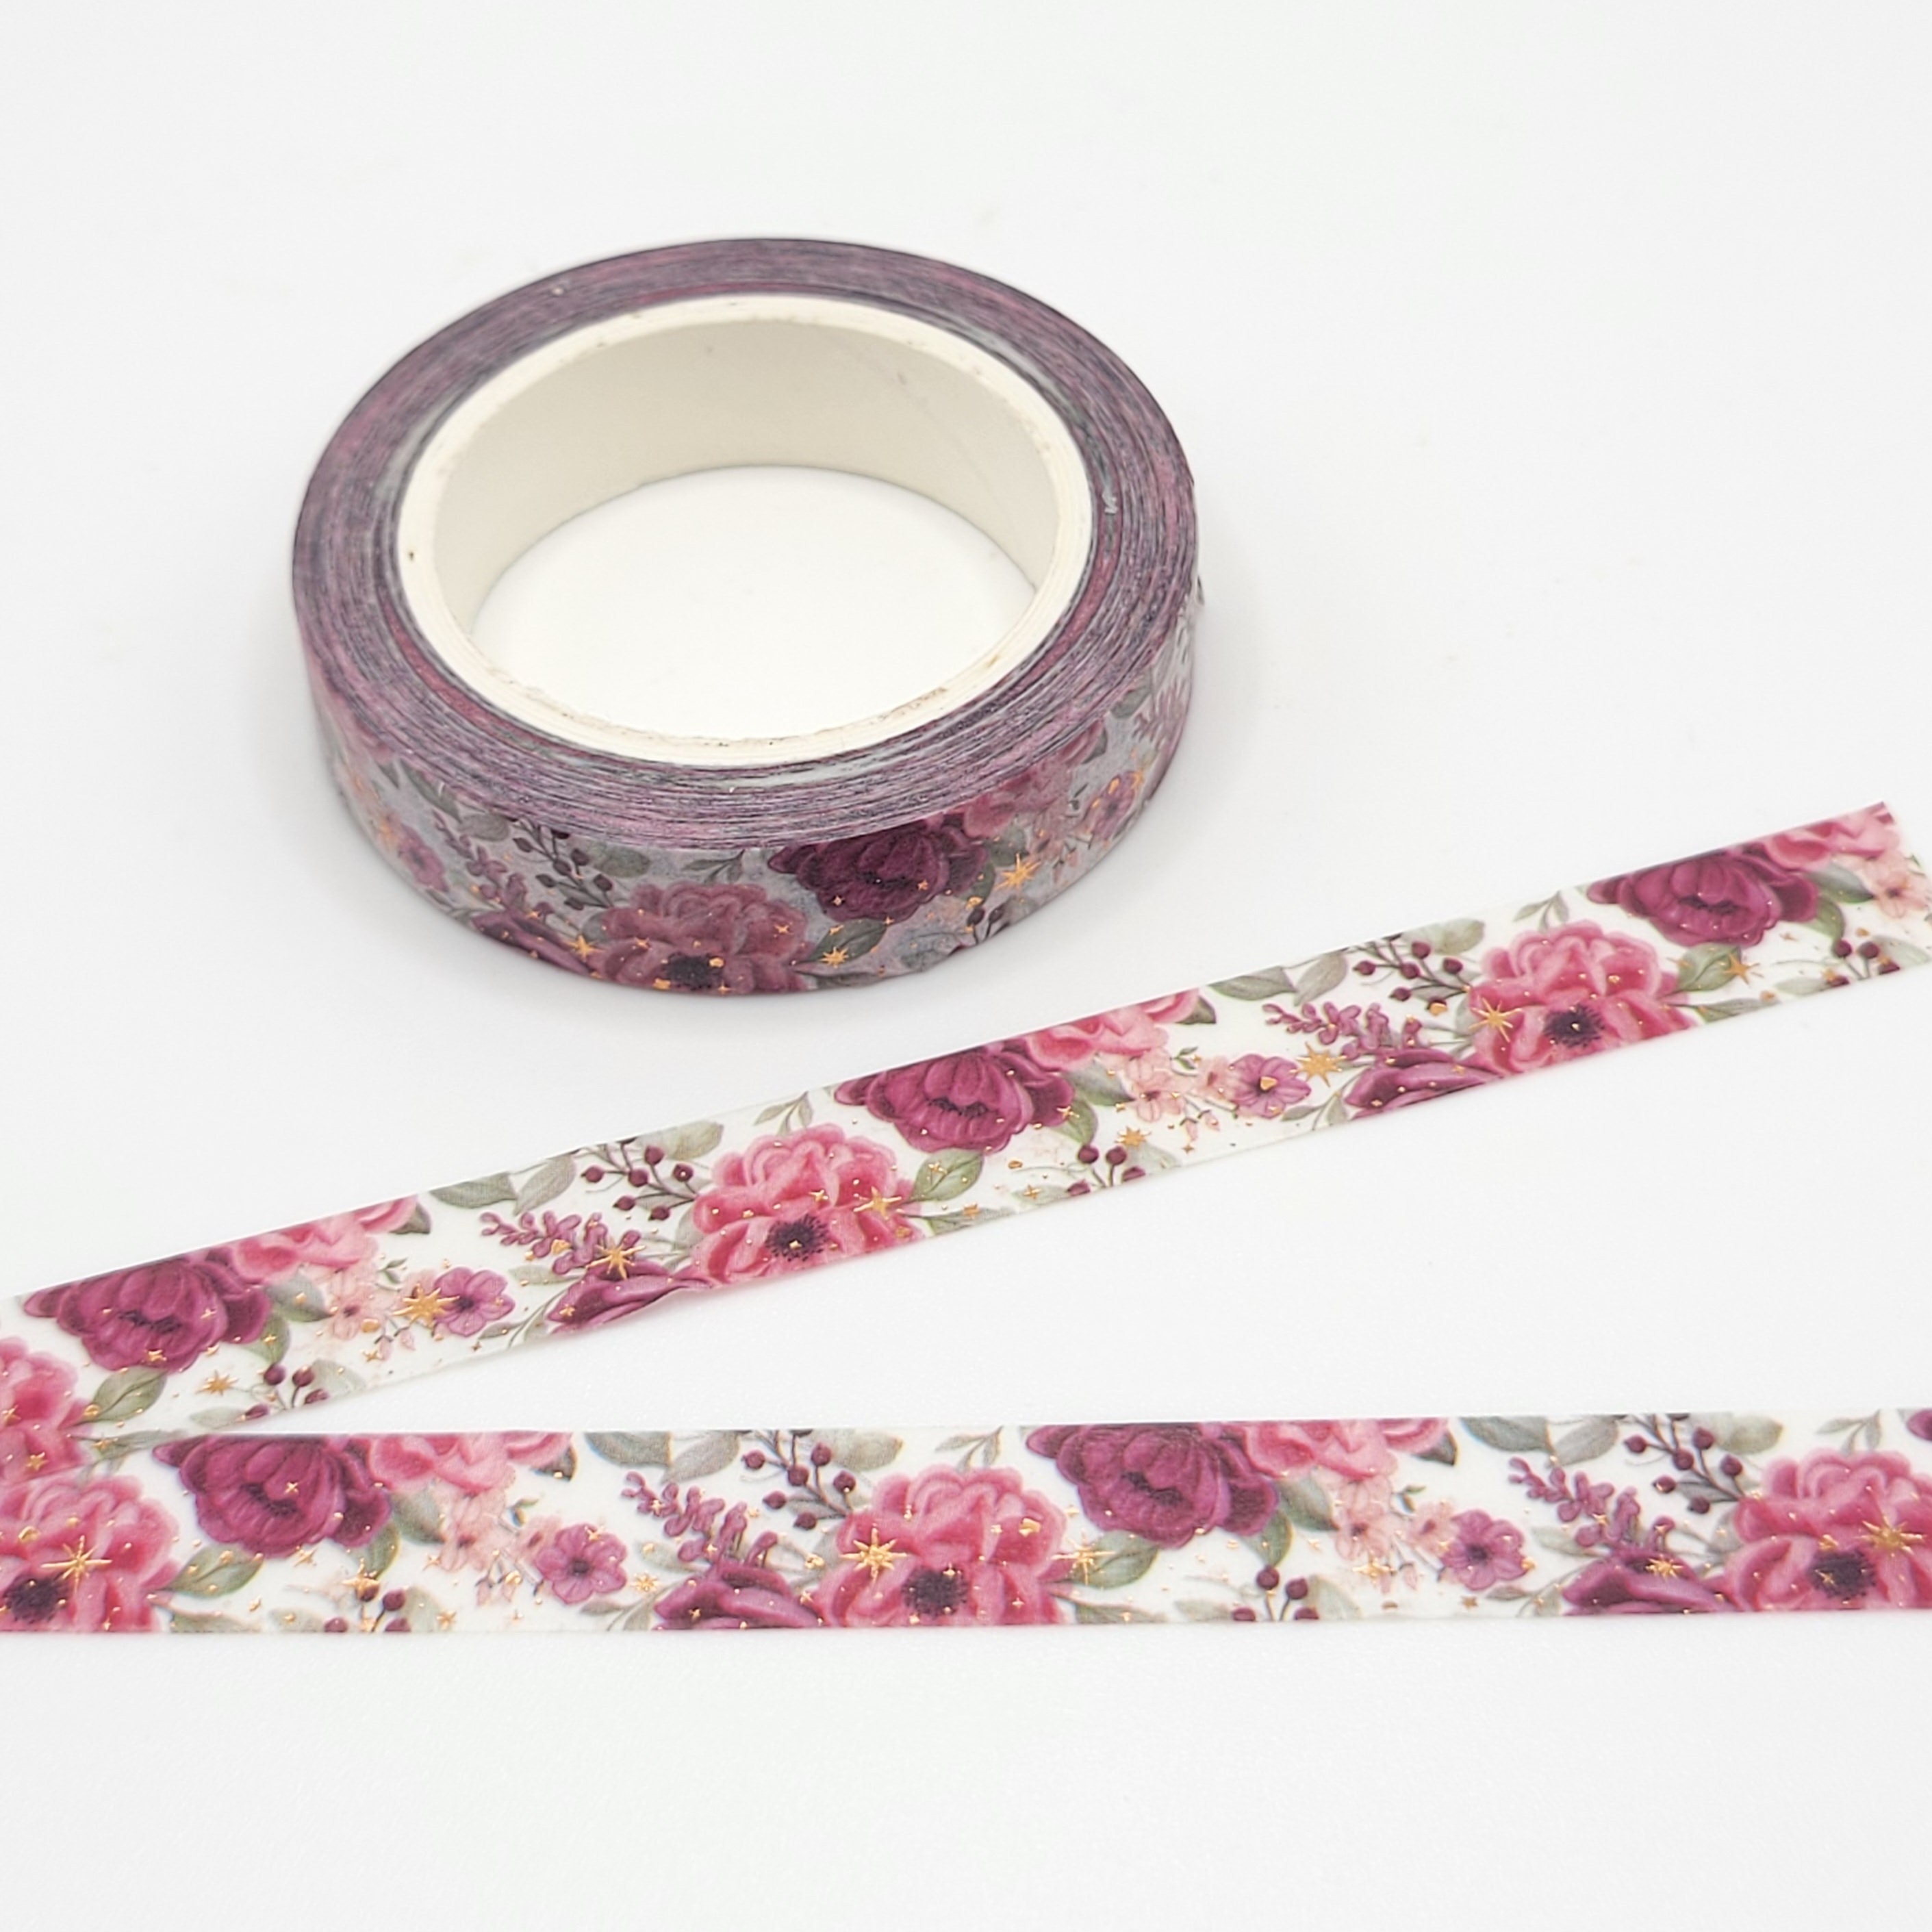 Valentine Washi Tape Samples Decorative Tape for Crafts Planner Decorations  Journal Embellishments Cute Stationery 1 Meter 